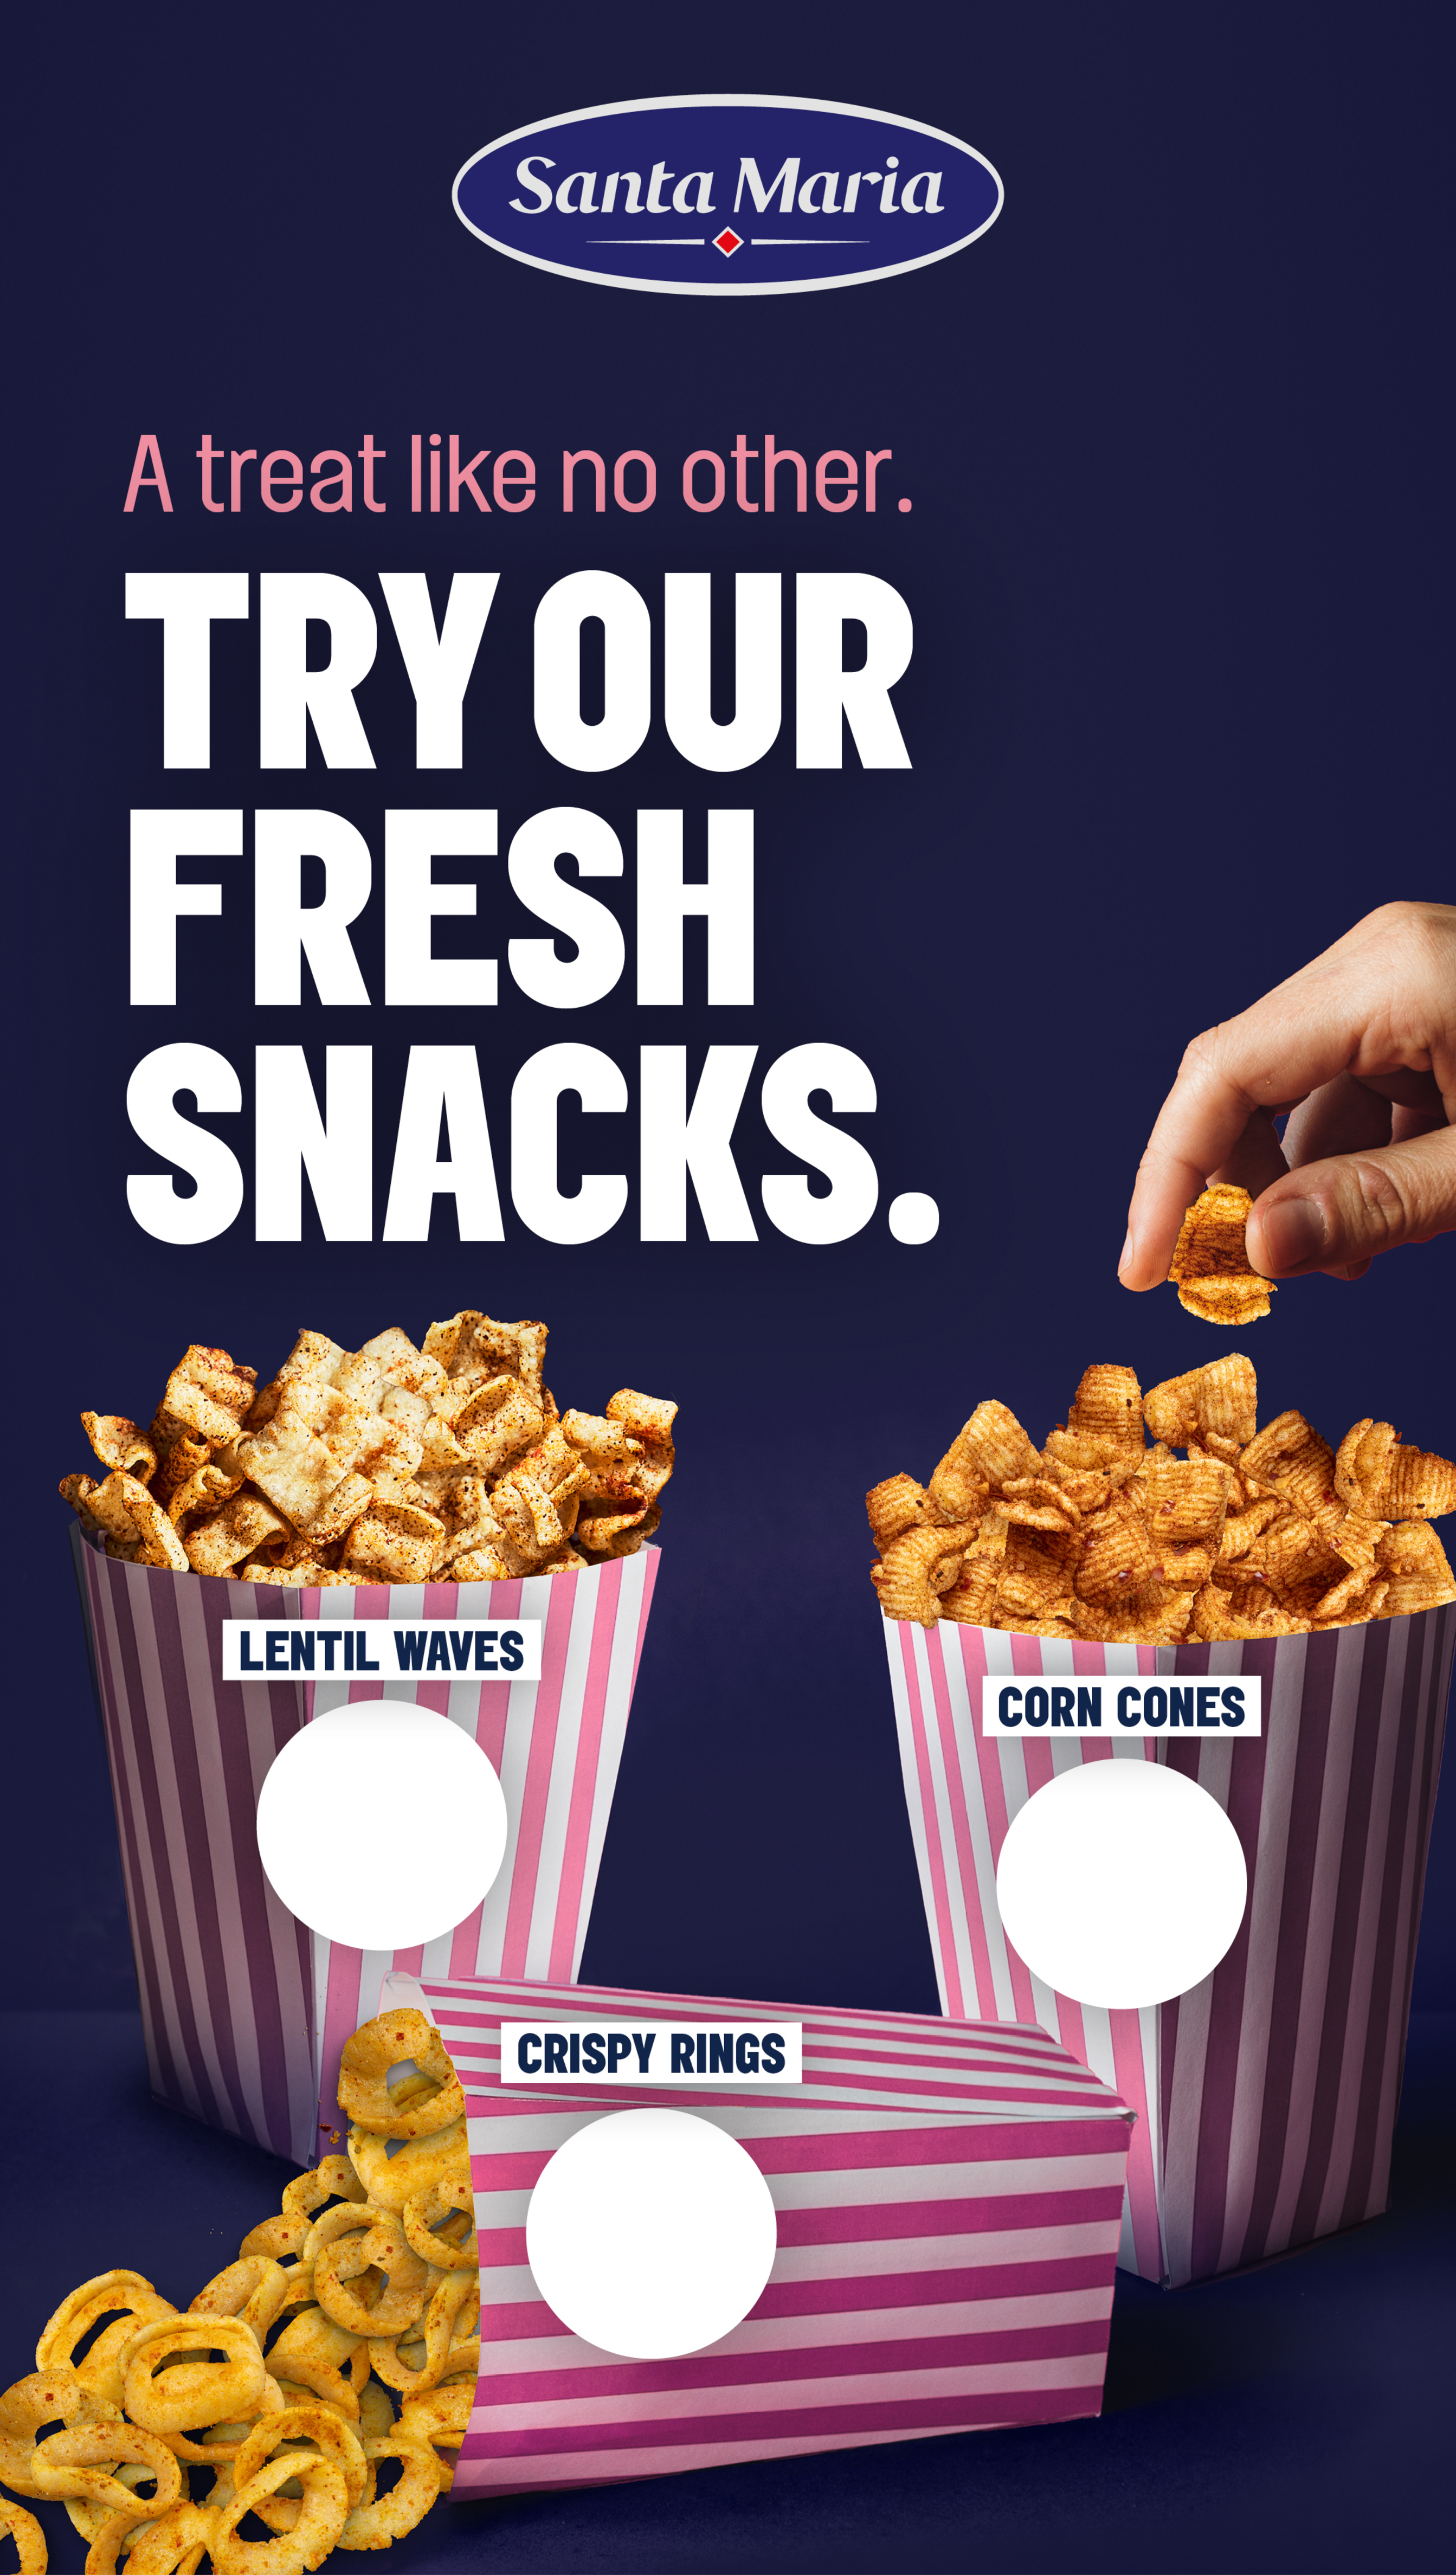 Snacking Poster Digital 2160x3820px